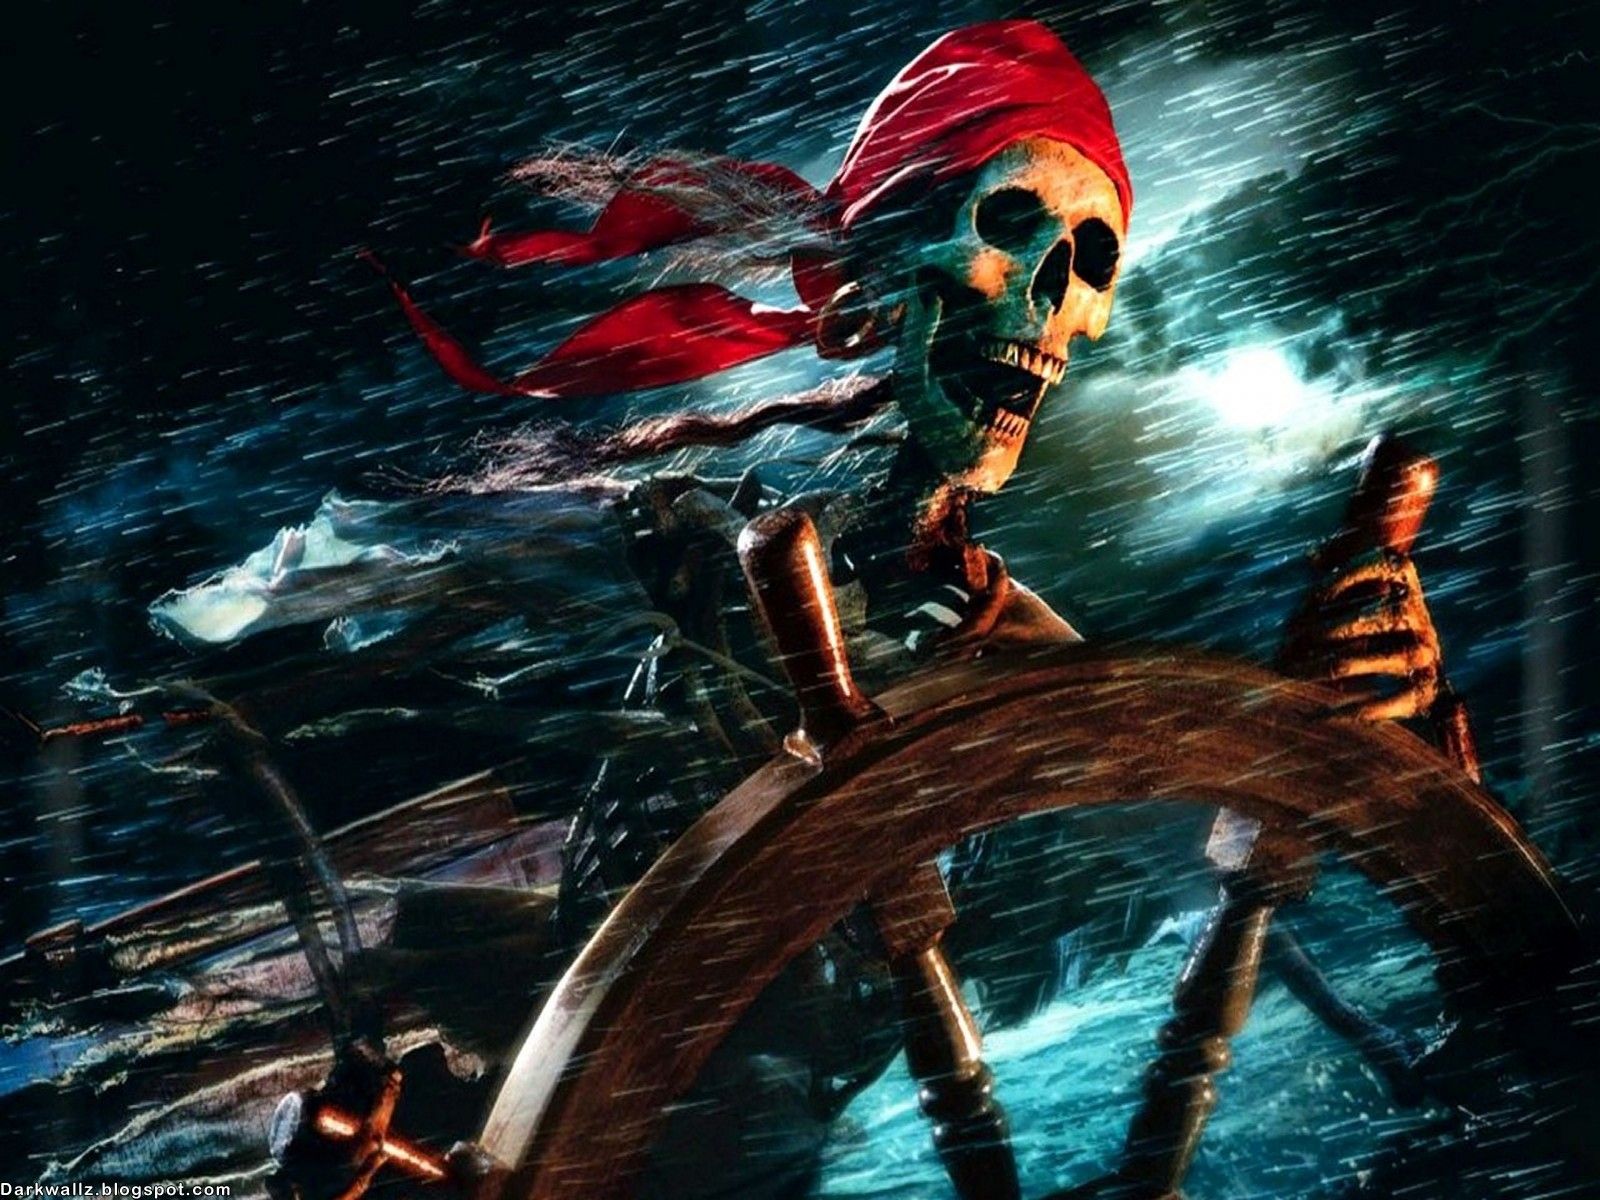 Pirates Of The Caribbean Phone Wallpaper - Mobile Abyss